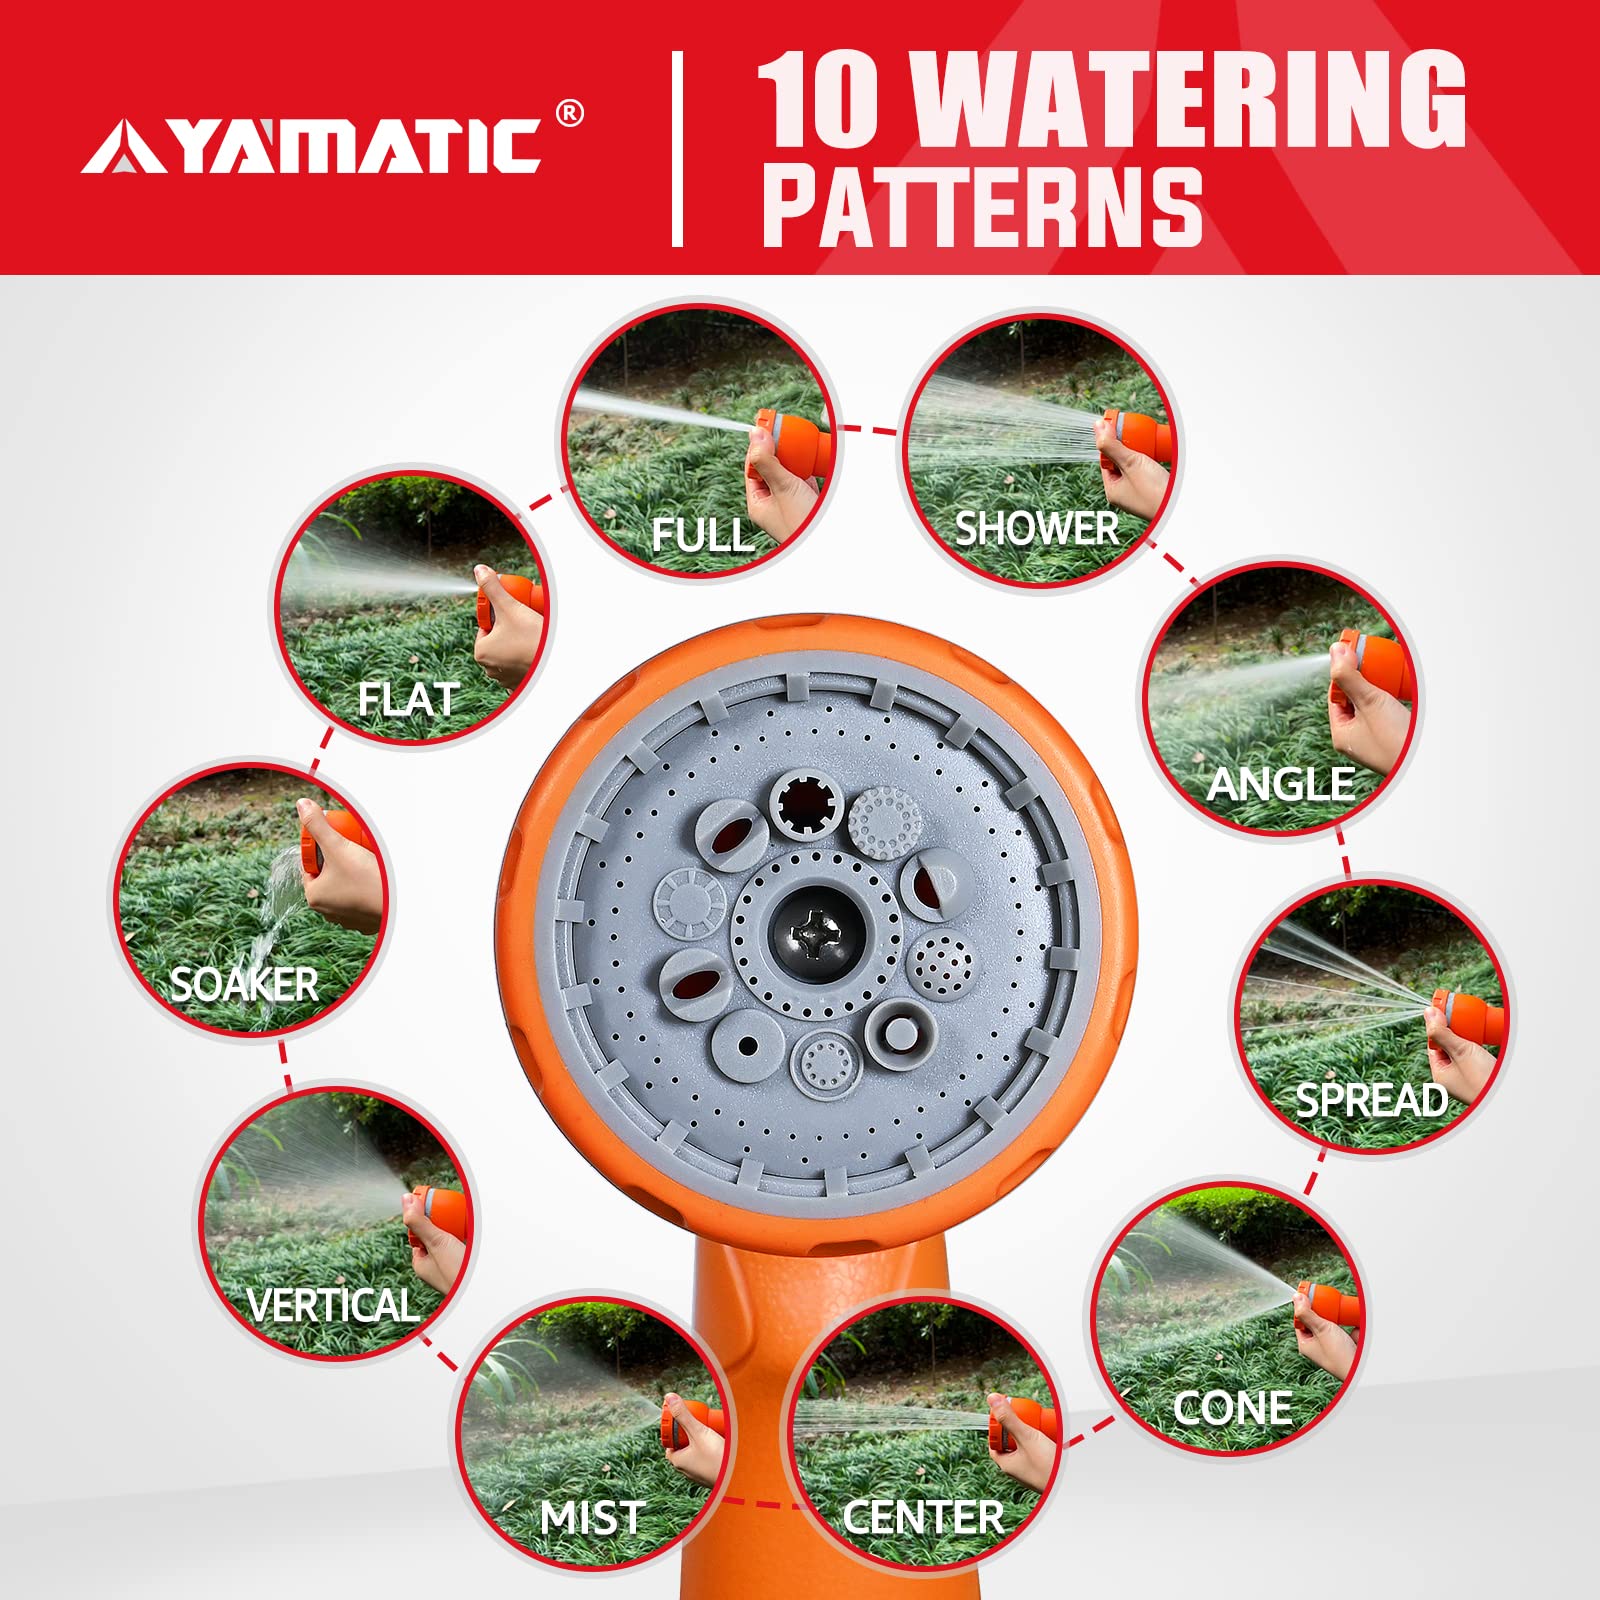 YAMATIC Garden Hose Nozzle, 10 Spray Patterns, Thumb Control On Off Valve for Watering Garden, Washing Cars, and Showering Pets - ABS Comfortable Anti-slip Grip